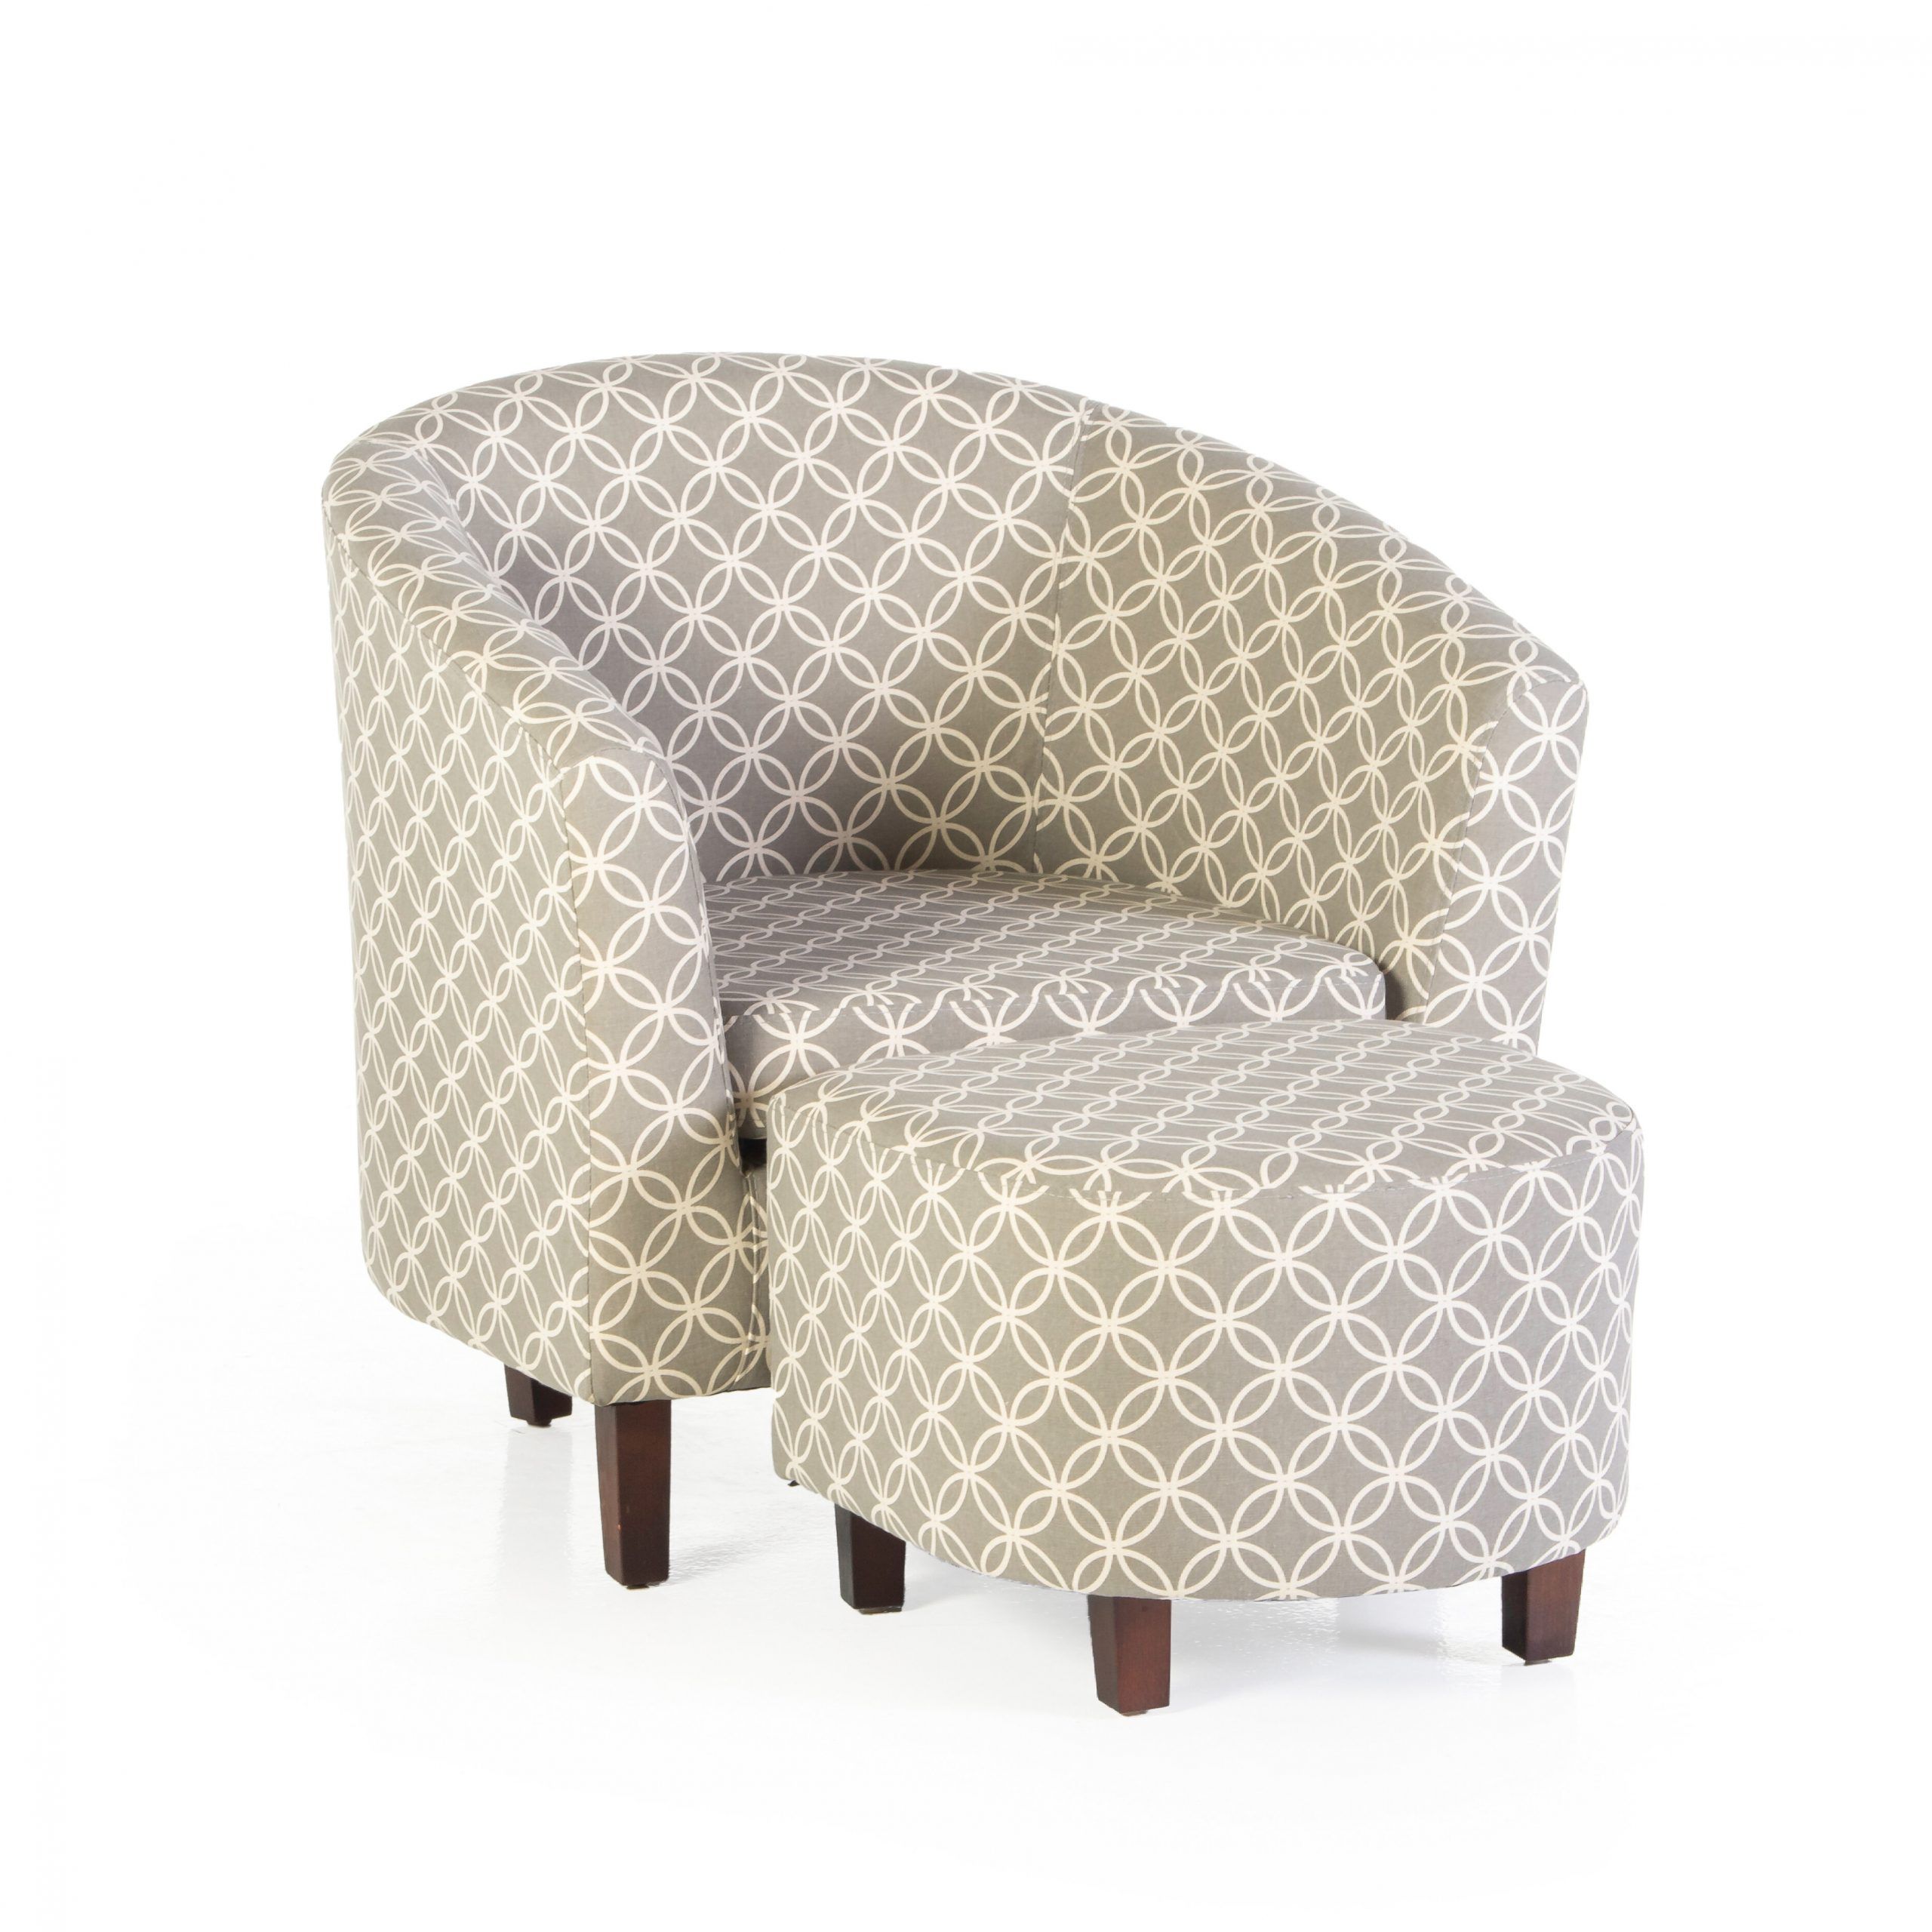 Most Current Brames Barrel Chair And Ottoman Intended For Louisiana Barrel Chair And Ottoman Sets (View 11 of 20)